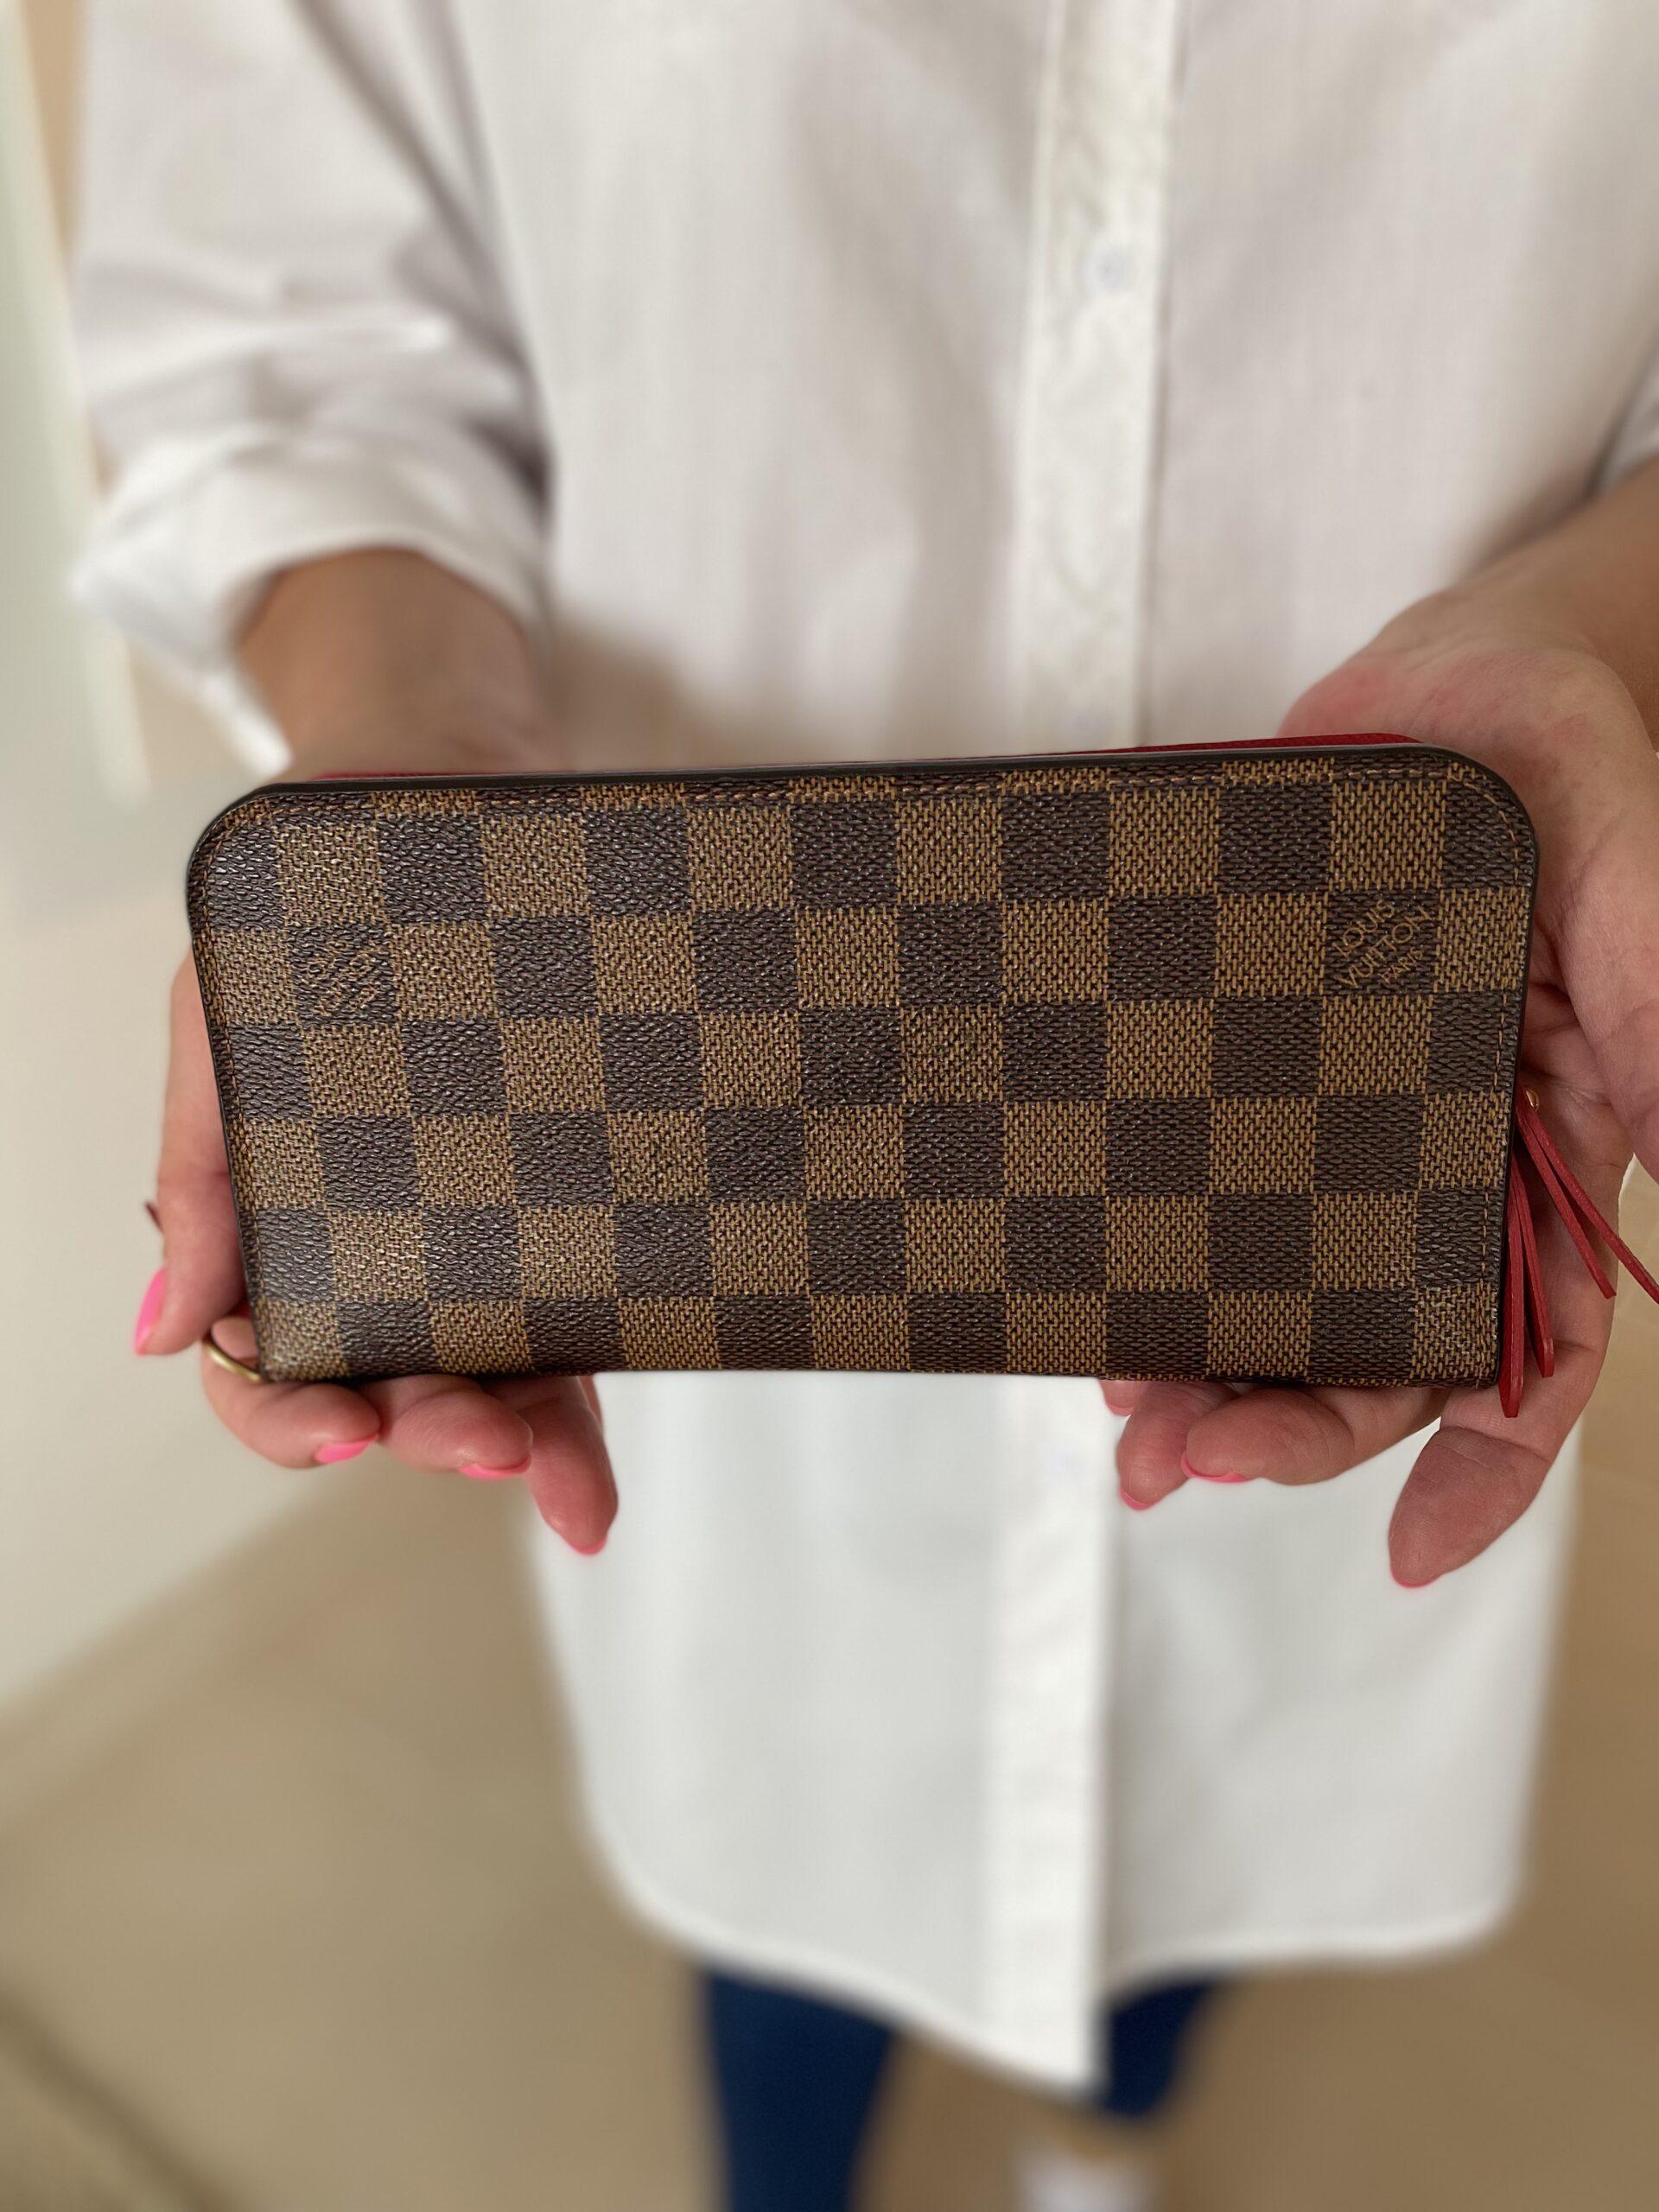 Louis Vuitton Wallet & Perfume - Power Tool Competitions - Win Vans & Power  Tools